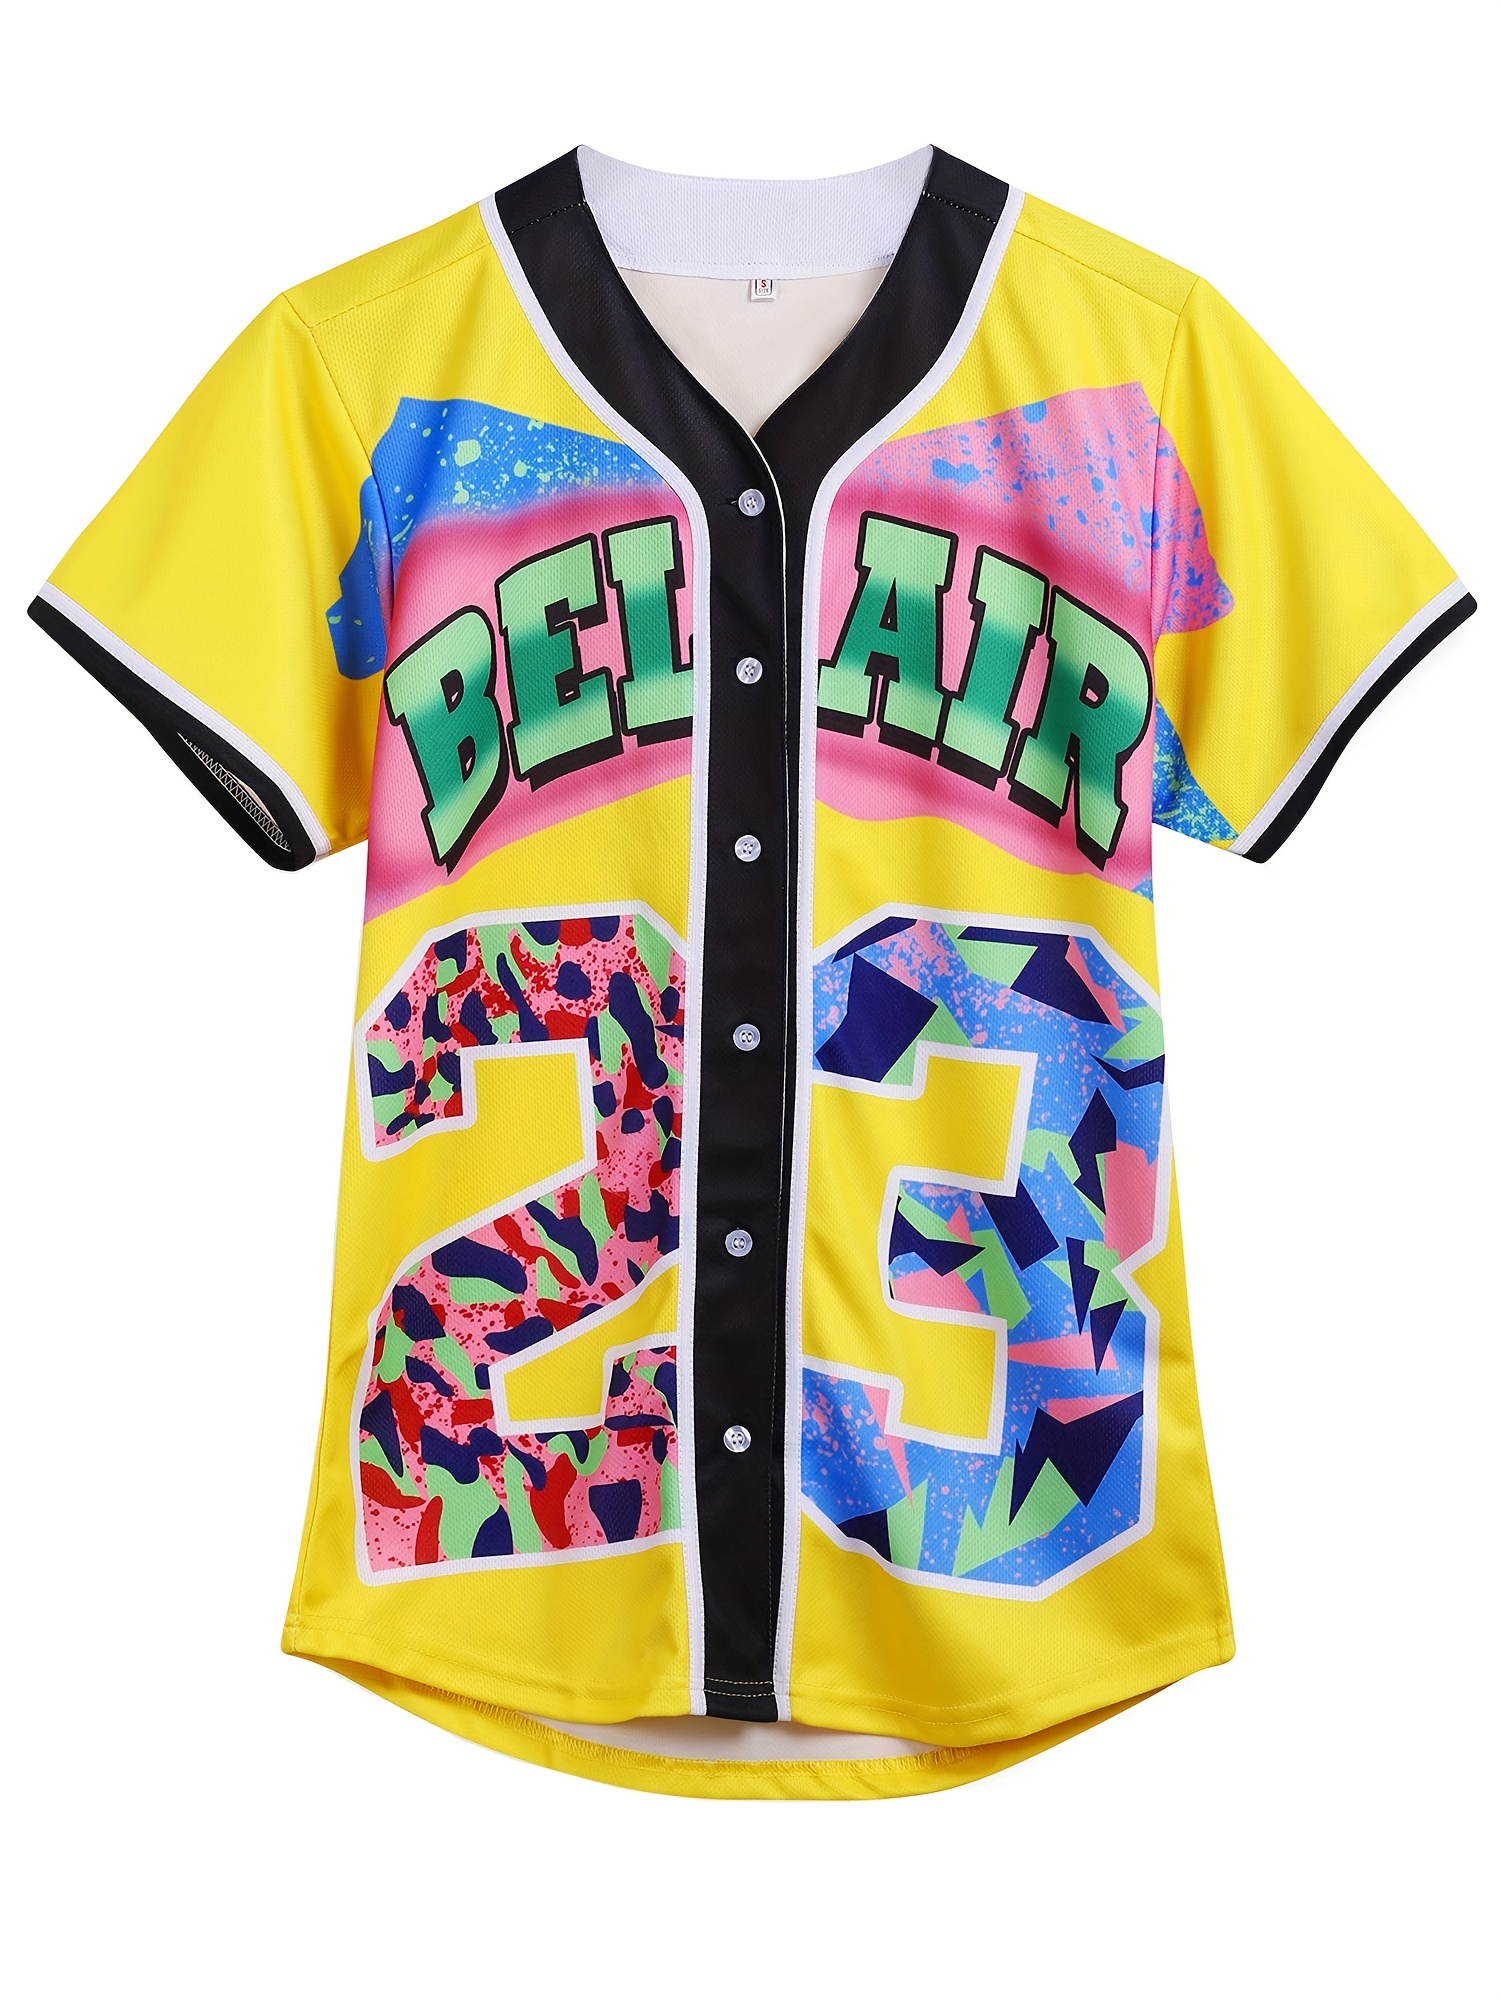 90s Outfit For Women,Yellow 23 Hip Hop Baseball Jersey Shirt For Theme  Party, 90s Stylish Clothing For Women